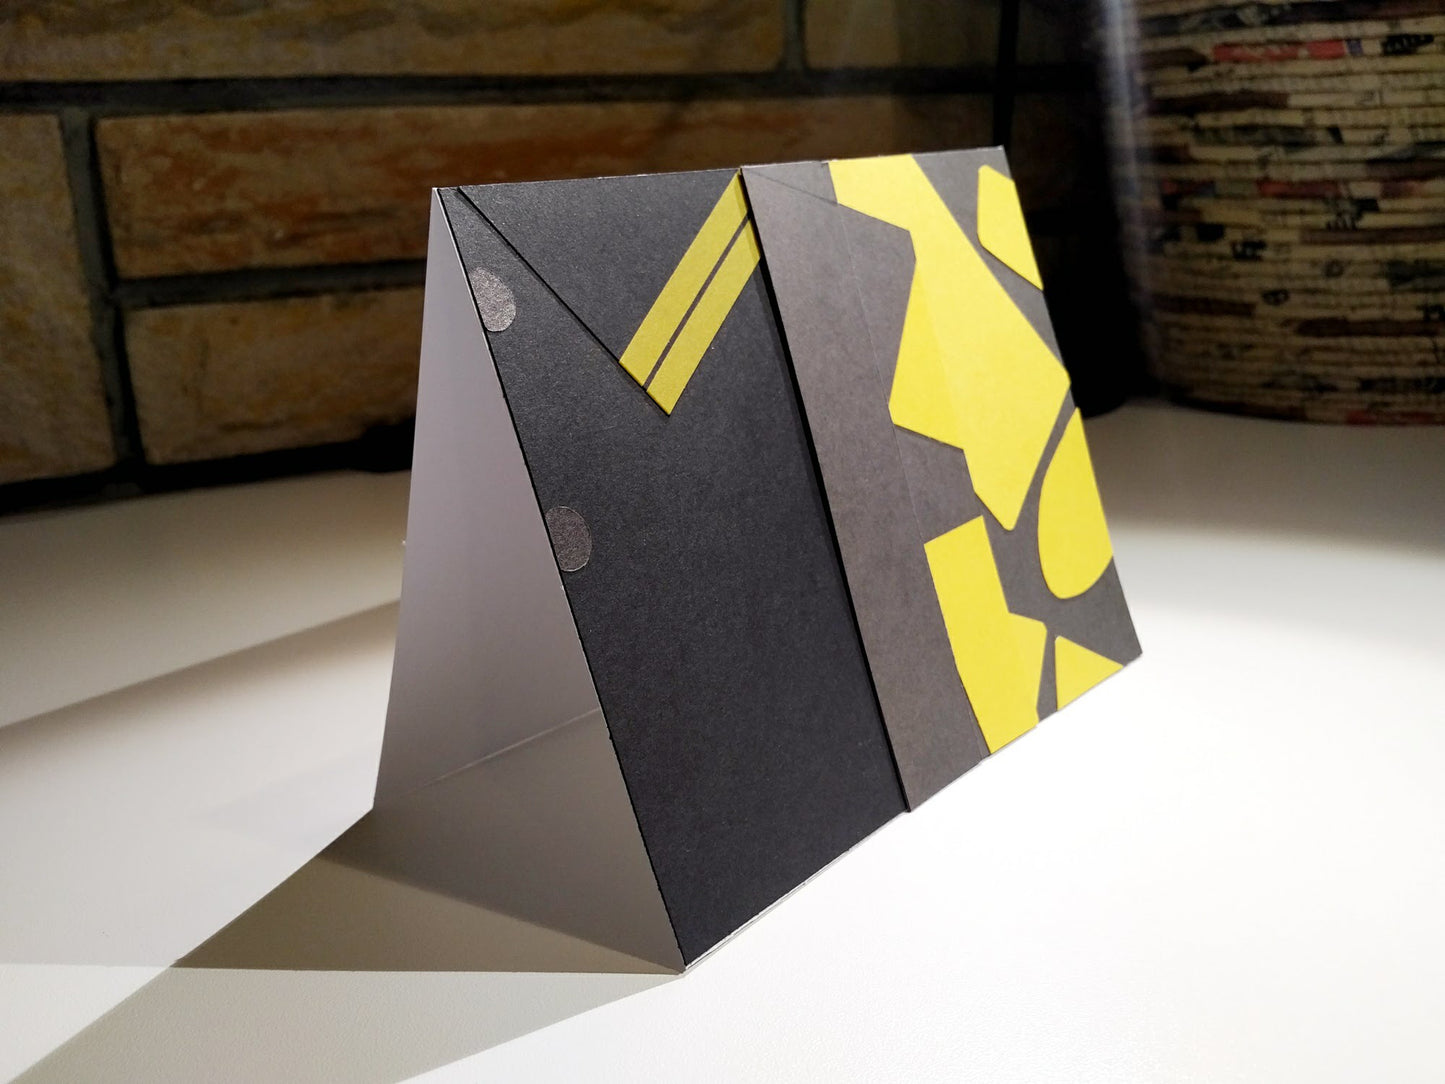 A card stands at an angle on a desk. A brown brick wall is in the background. The front of the card looks like a portion of person's shirt, black with yellow details, designed to look like an outfit worn by Eggsy Unwin in the movie Kingsman: The Secret Service.